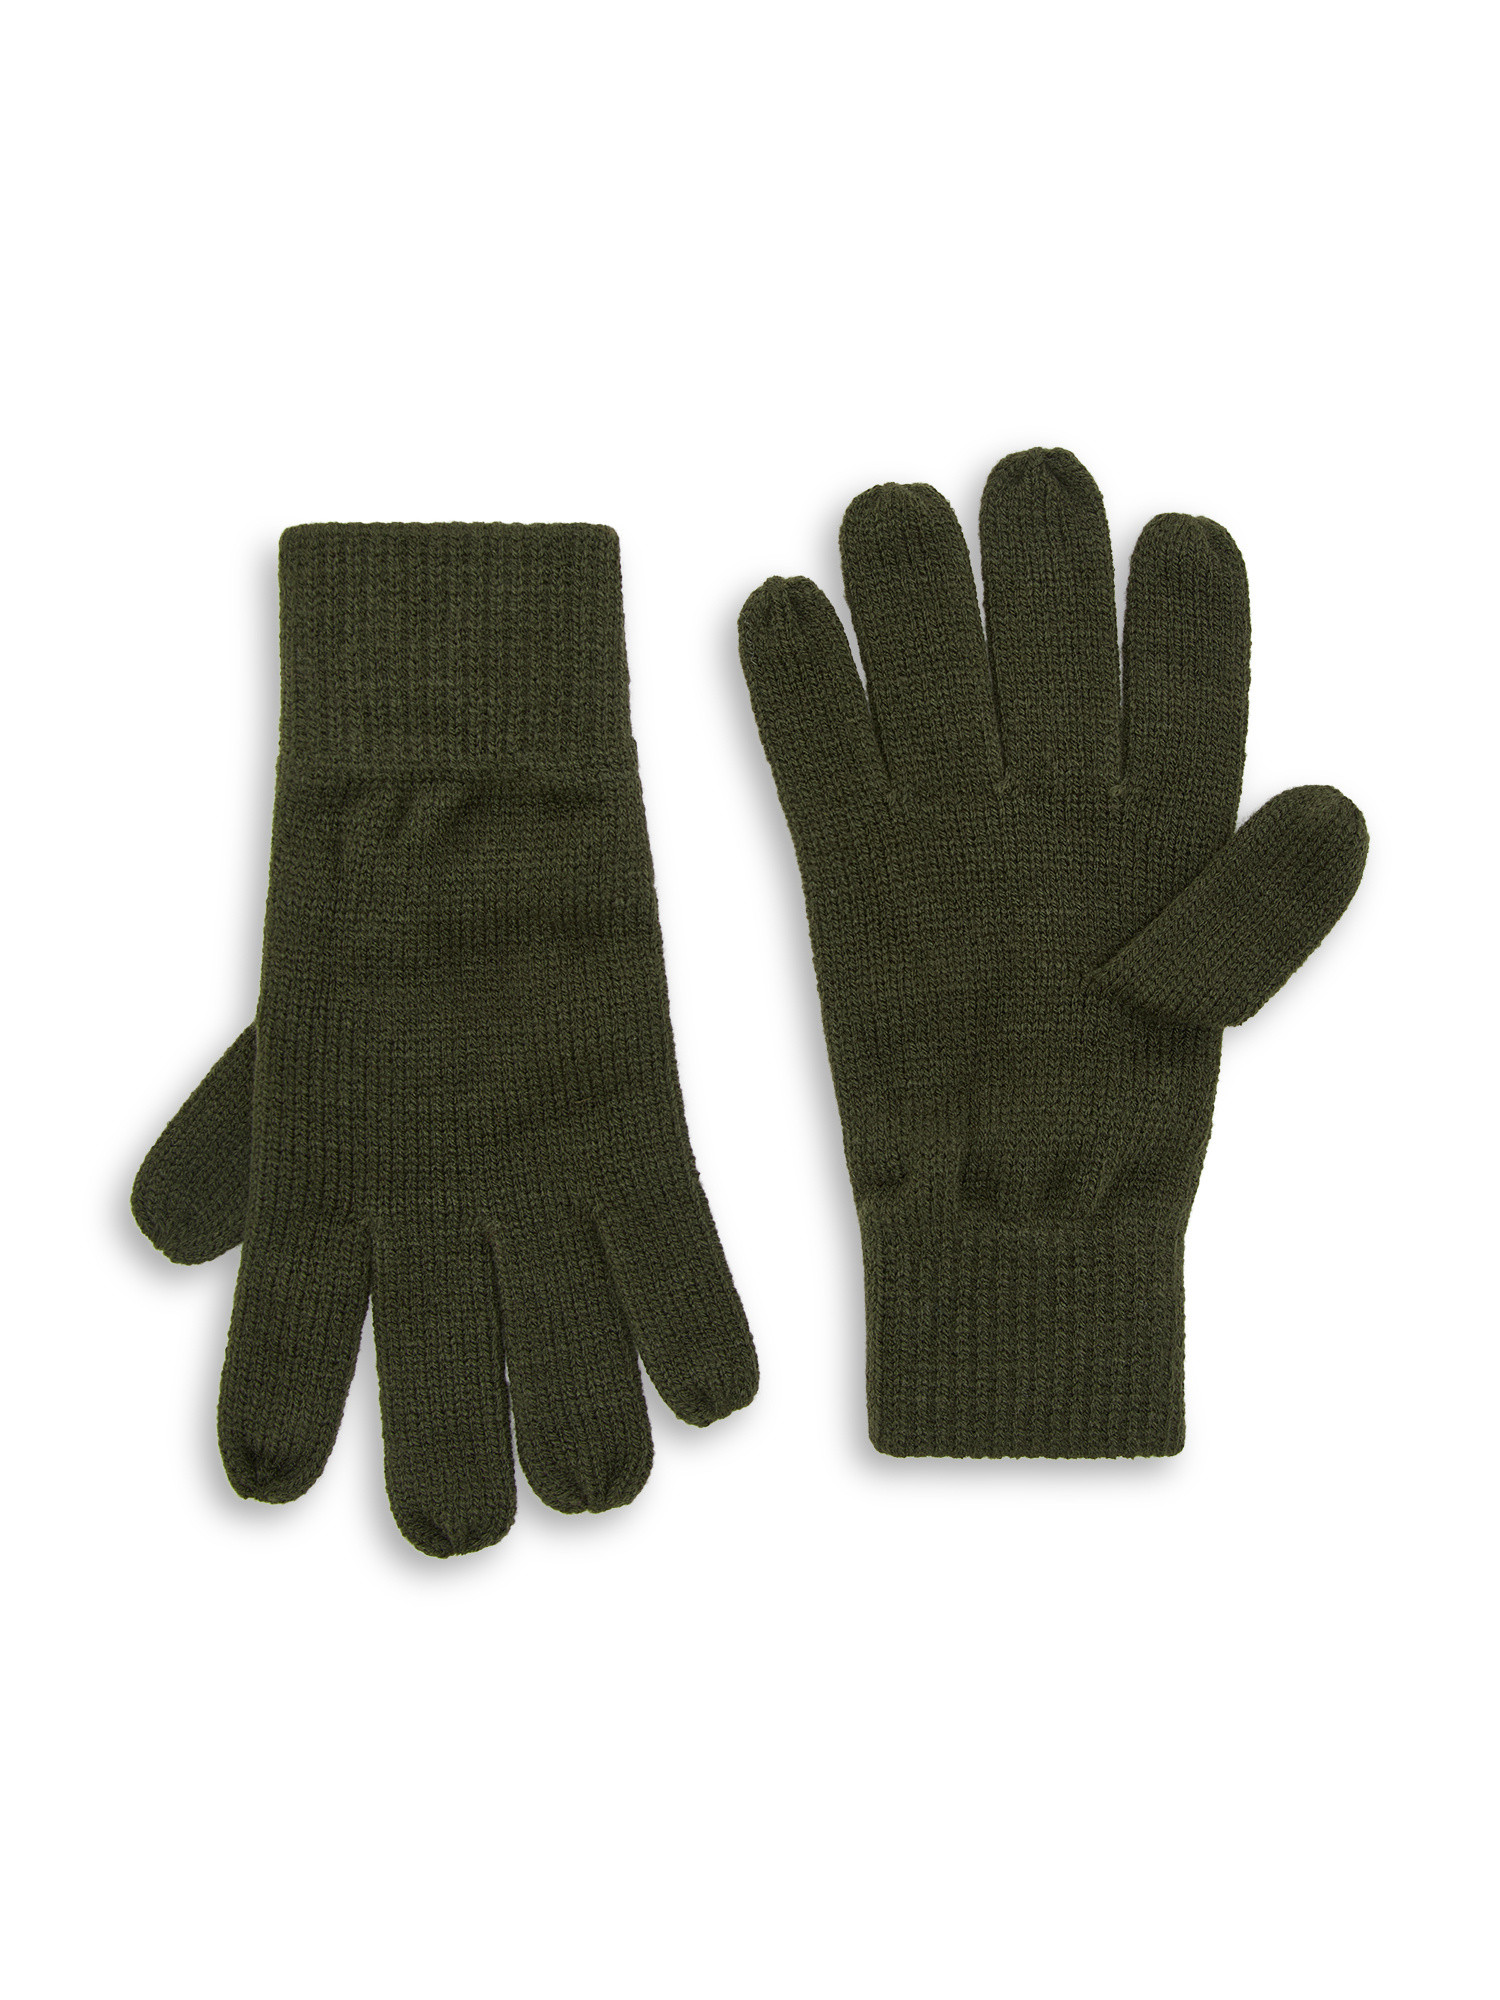 Luca D'Altieri - Basic knitted gloves, Olive Green, large image number 0